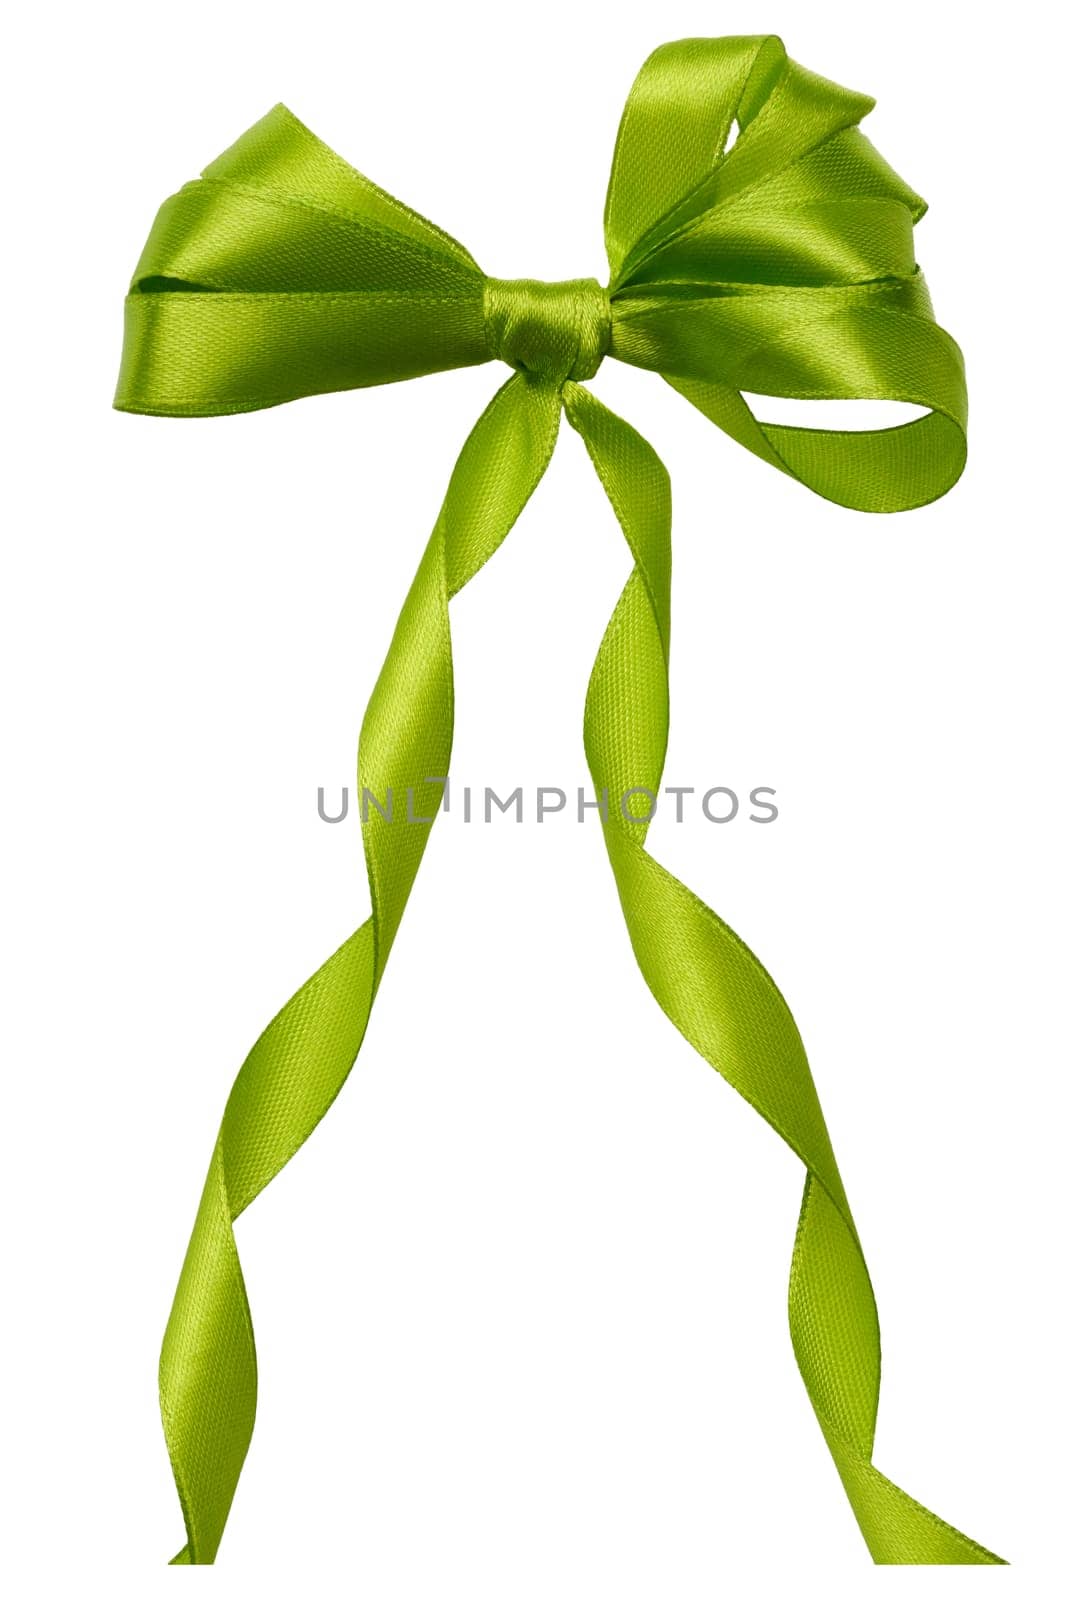 Tied bow from green silk ribbon on isolated background, decor for gift